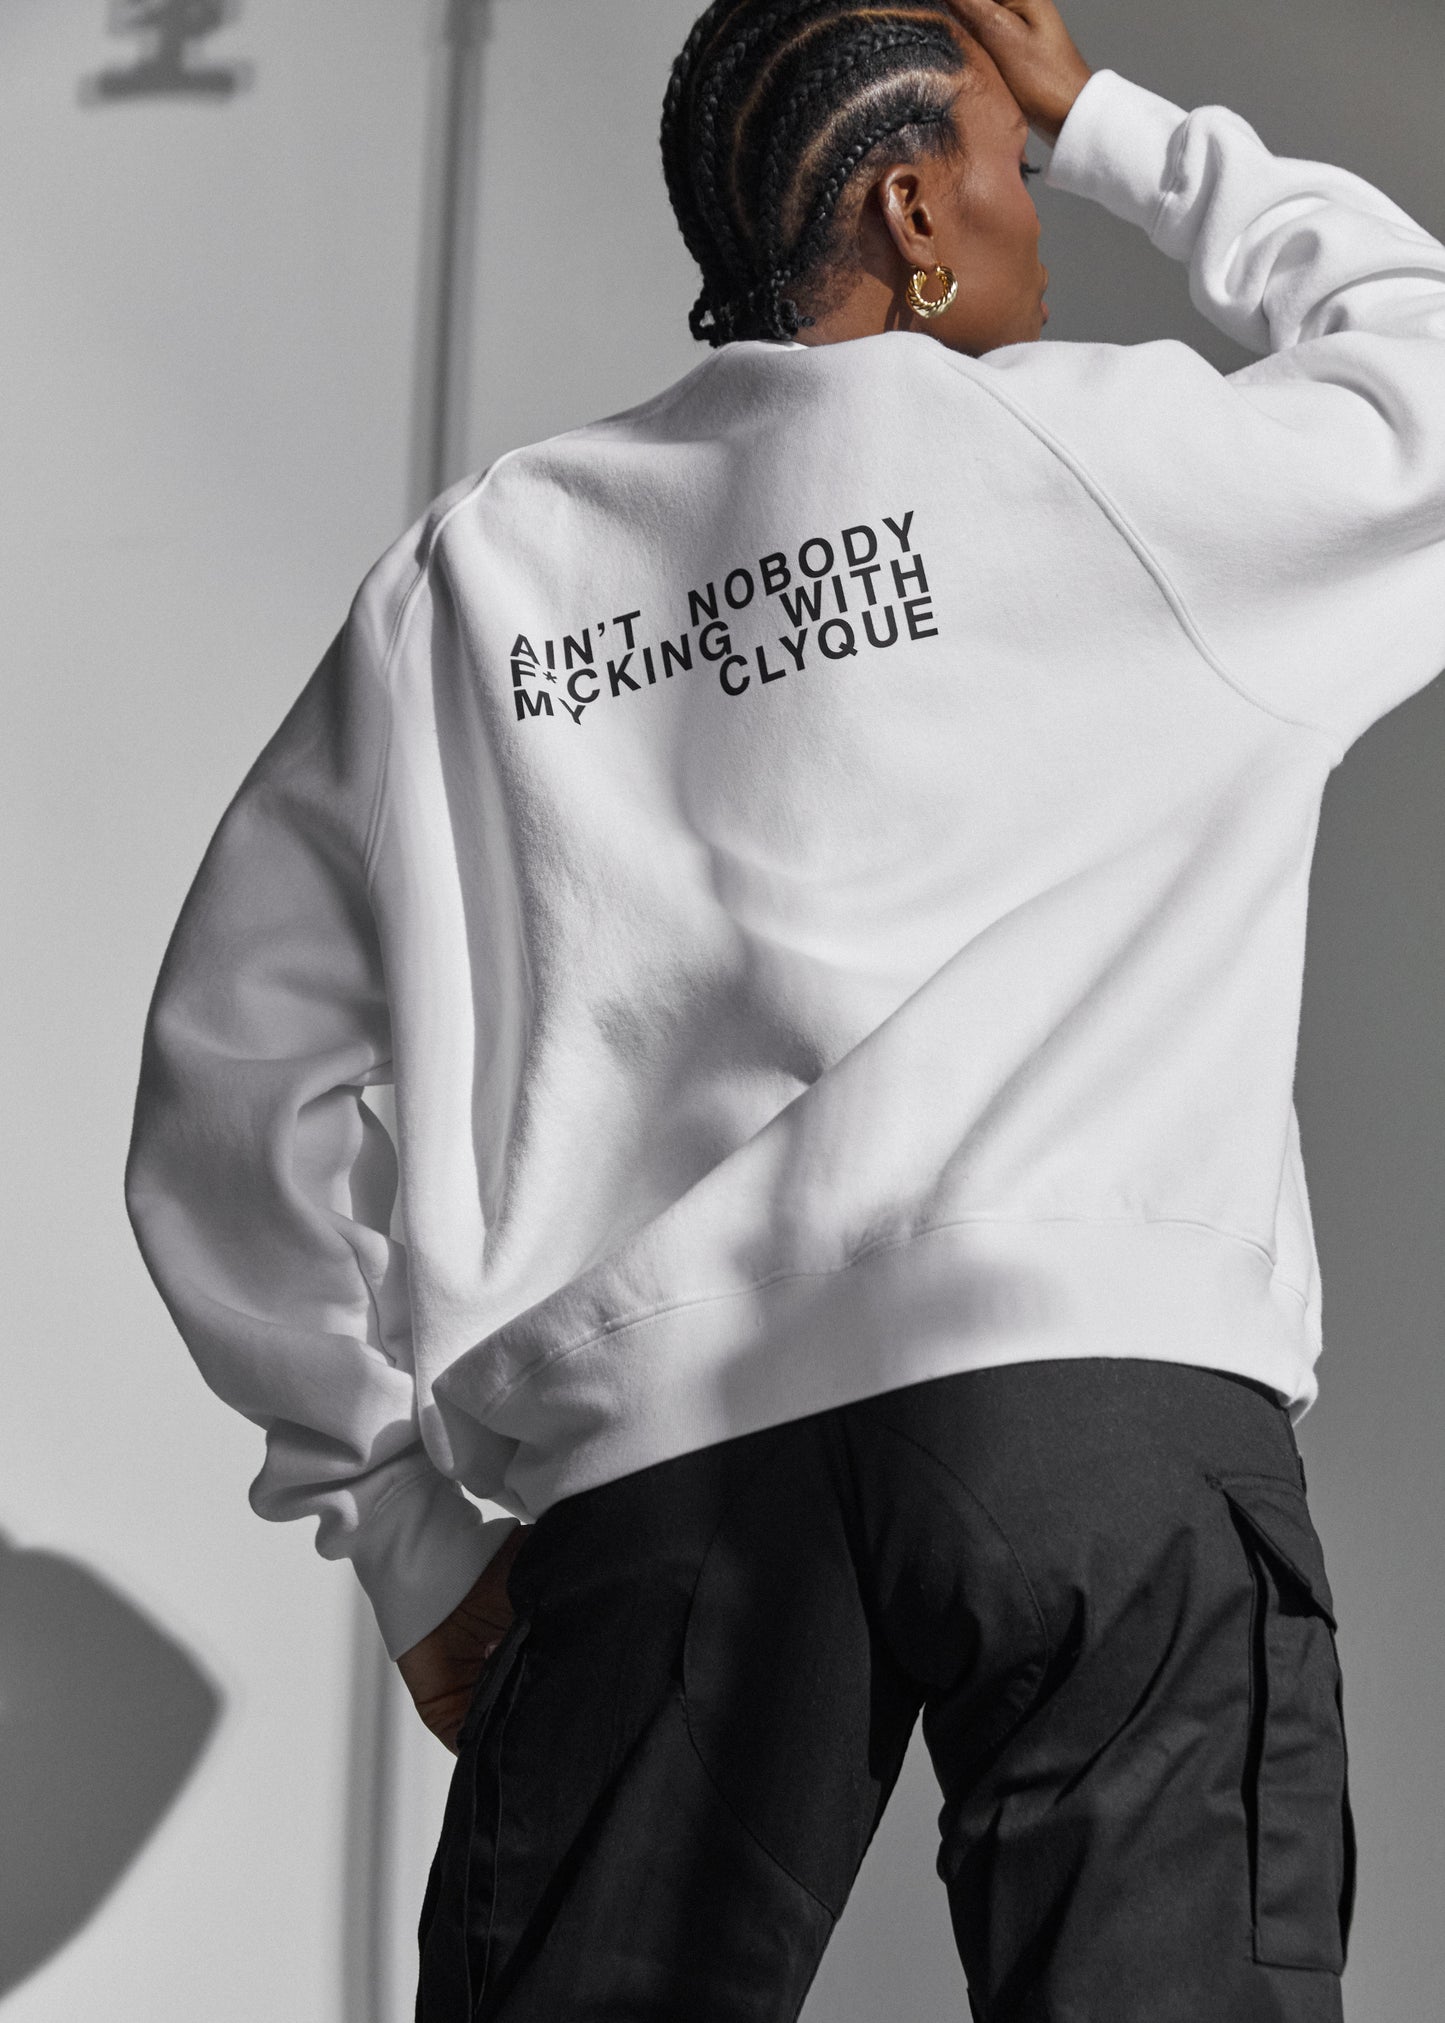 Model back facing the camera in an white unisex sweatshirt by Clyque showing the back  writing.